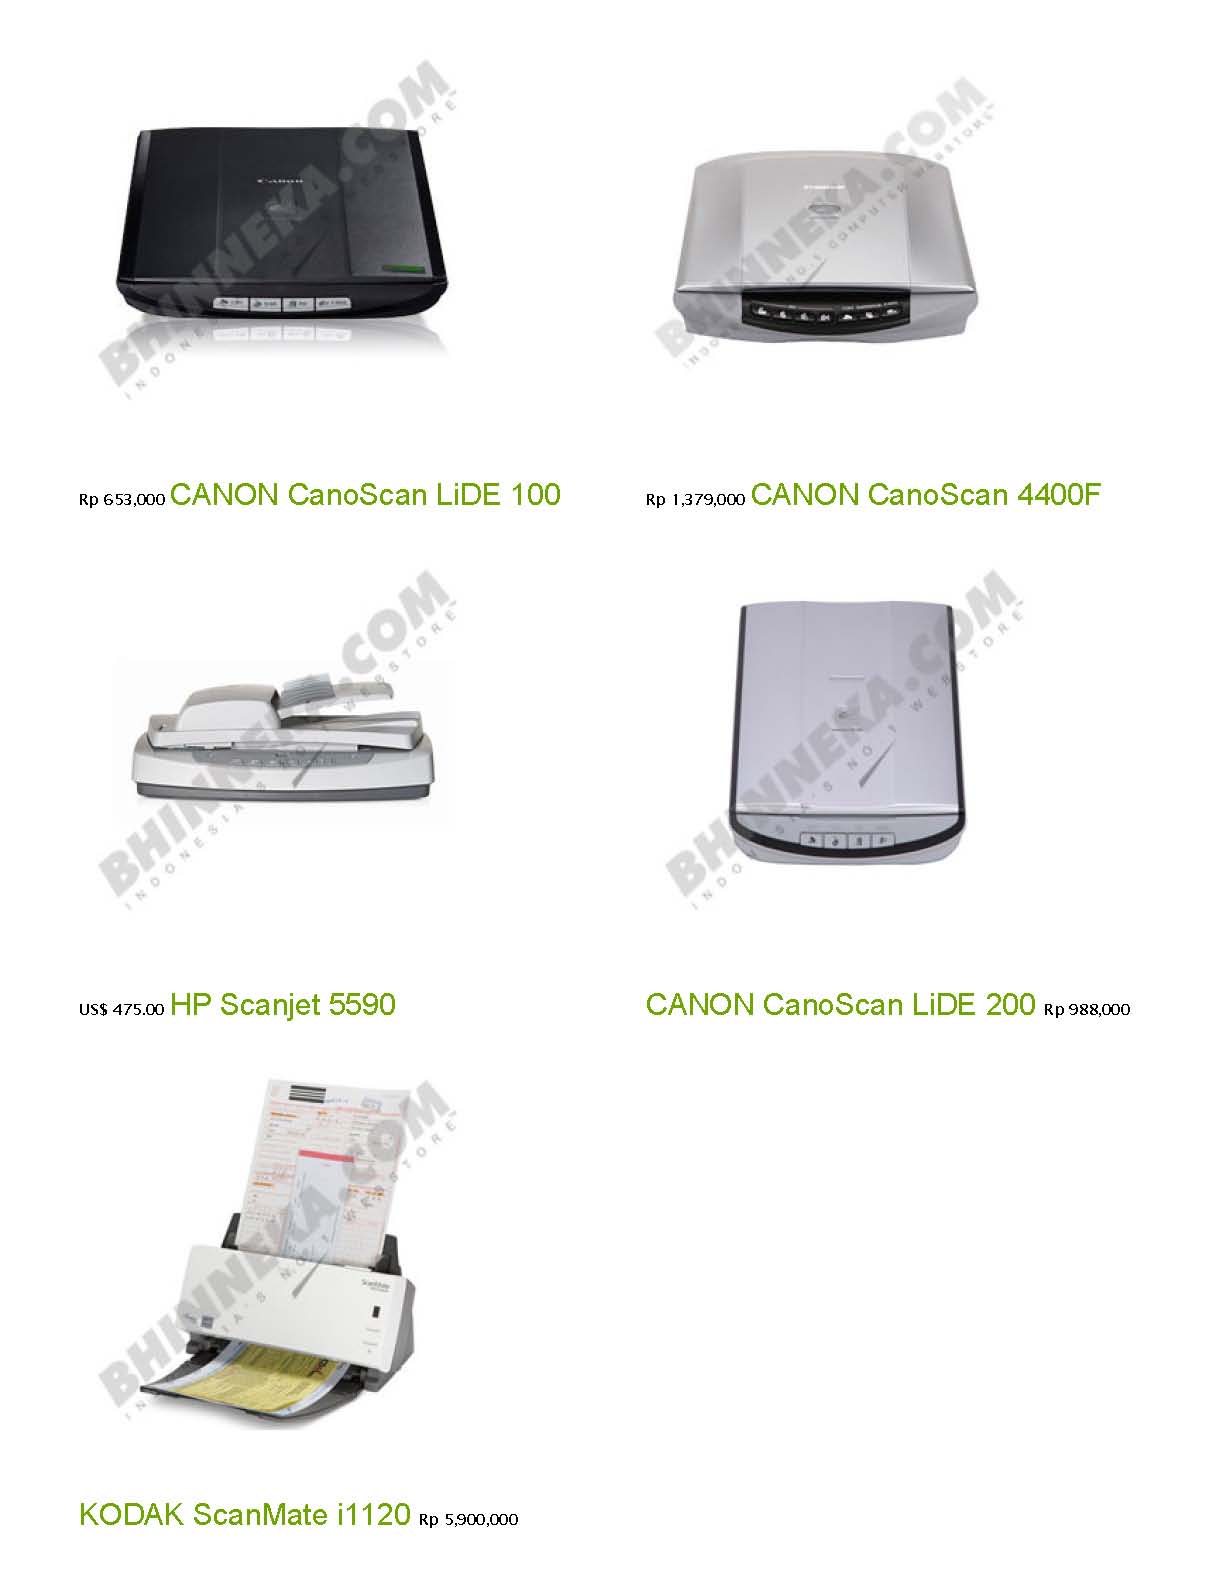 Canon lide 200 software download